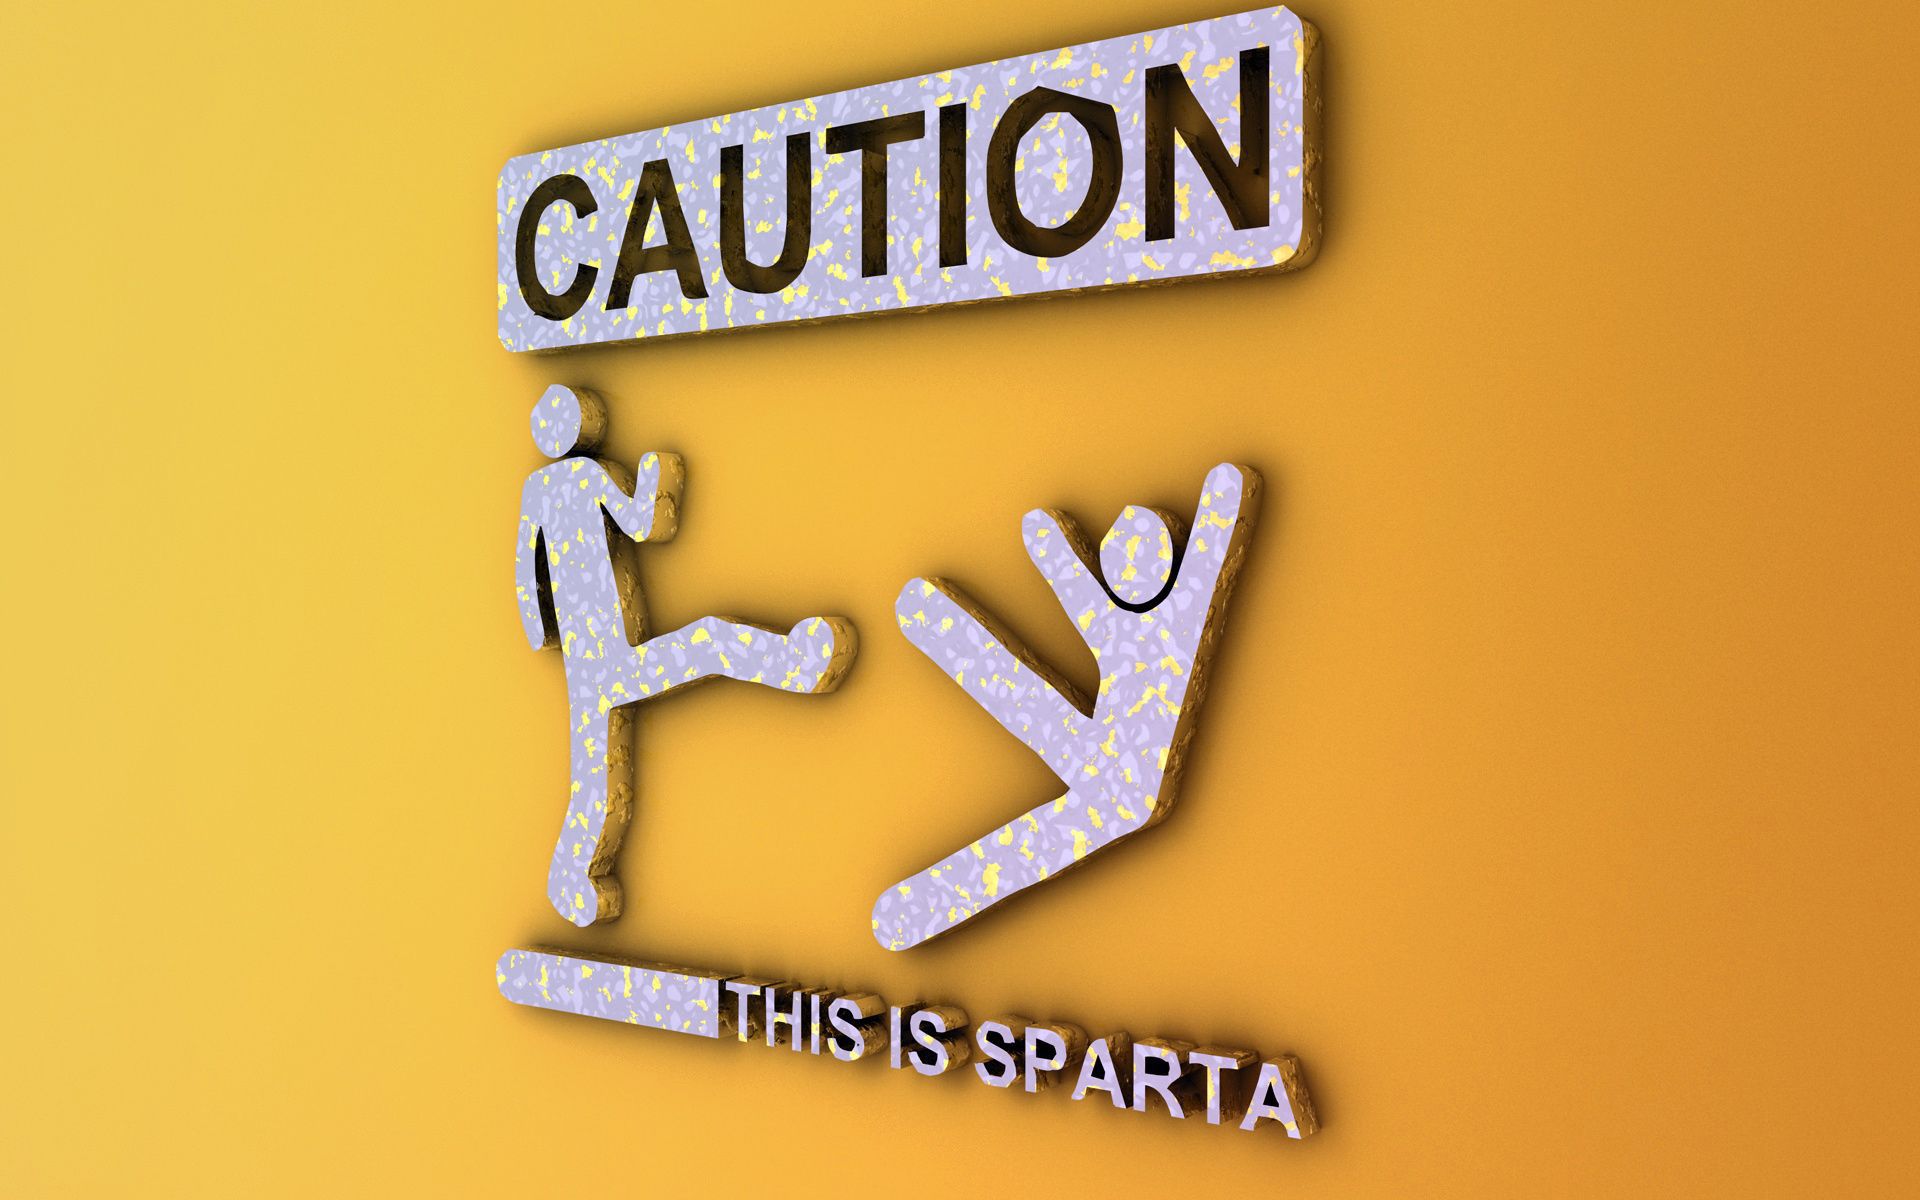 HD wallpaper, Is, Sparta, This